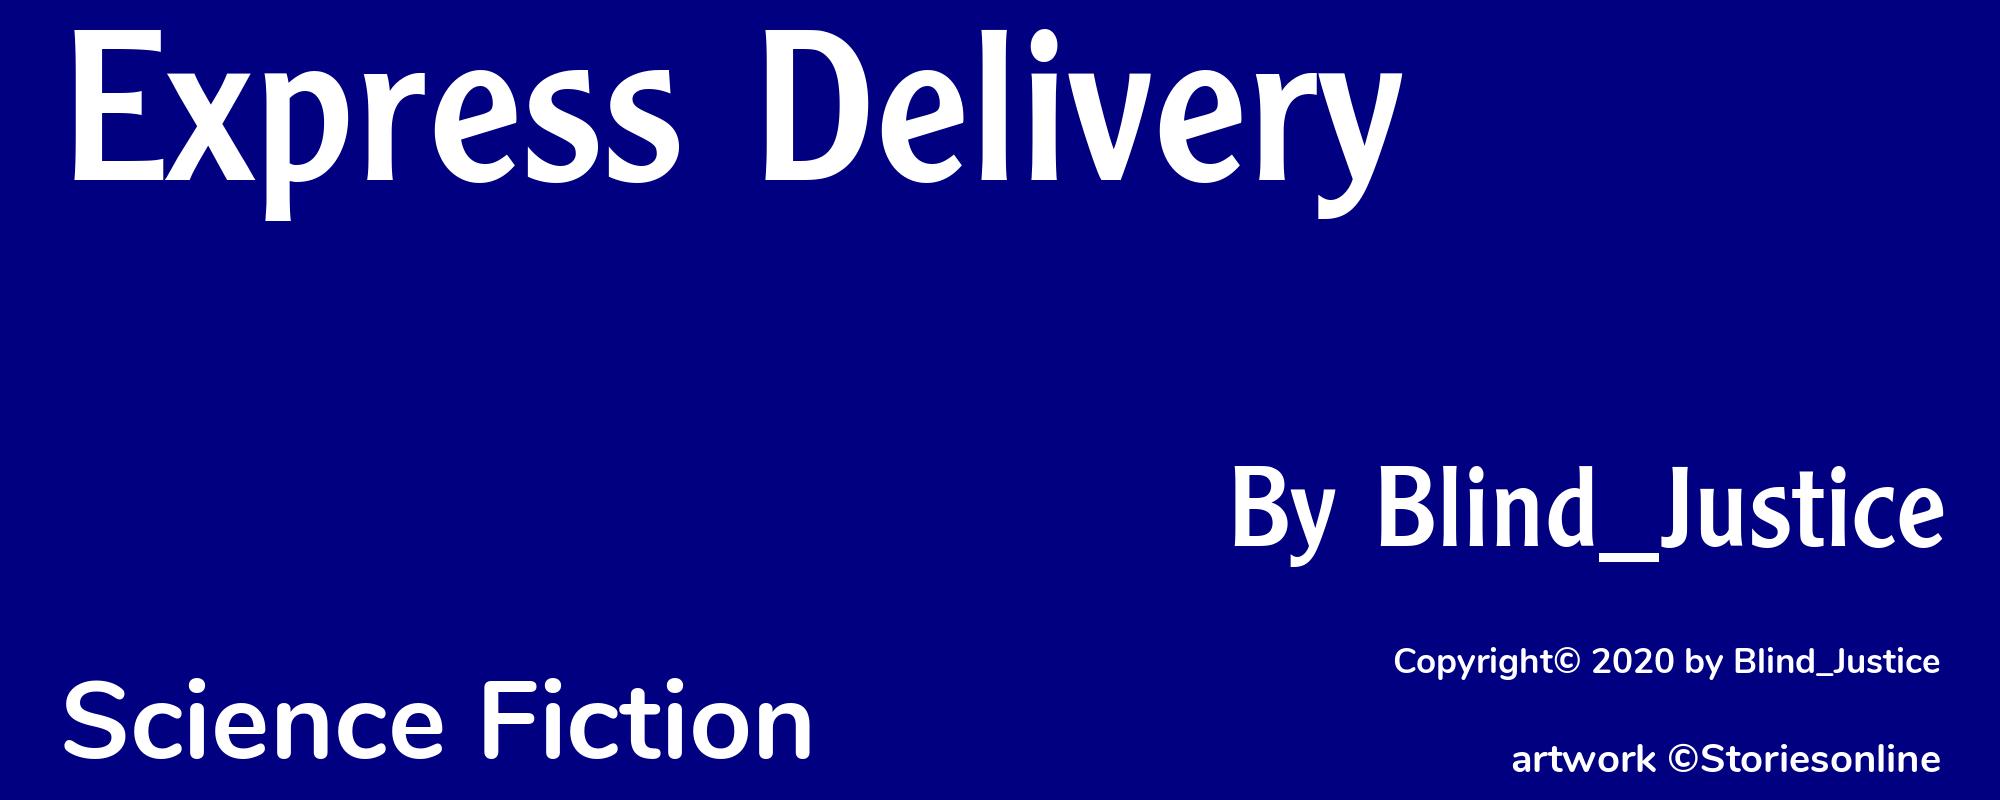 Express Delivery - Cover